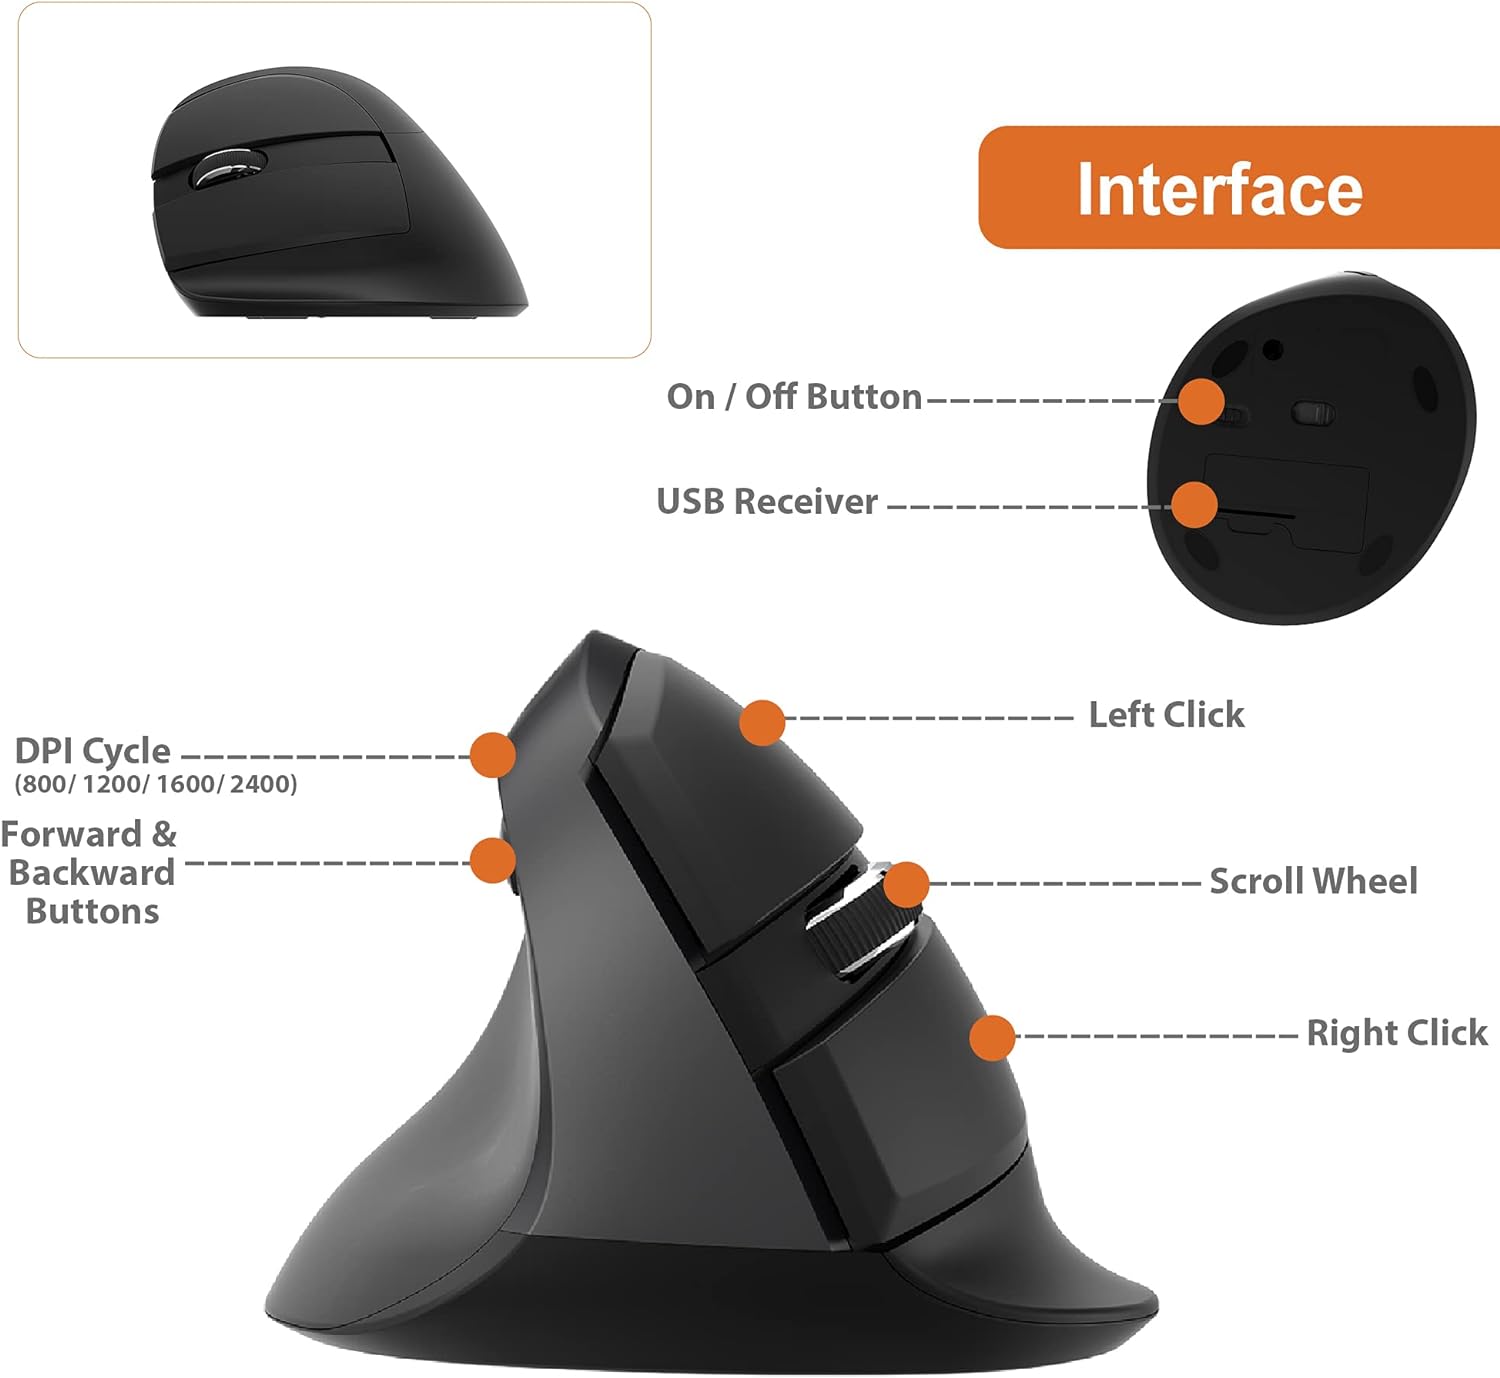 J-Tech Digital Ergonomic Left Hand Mouse with Wireless Connection Review